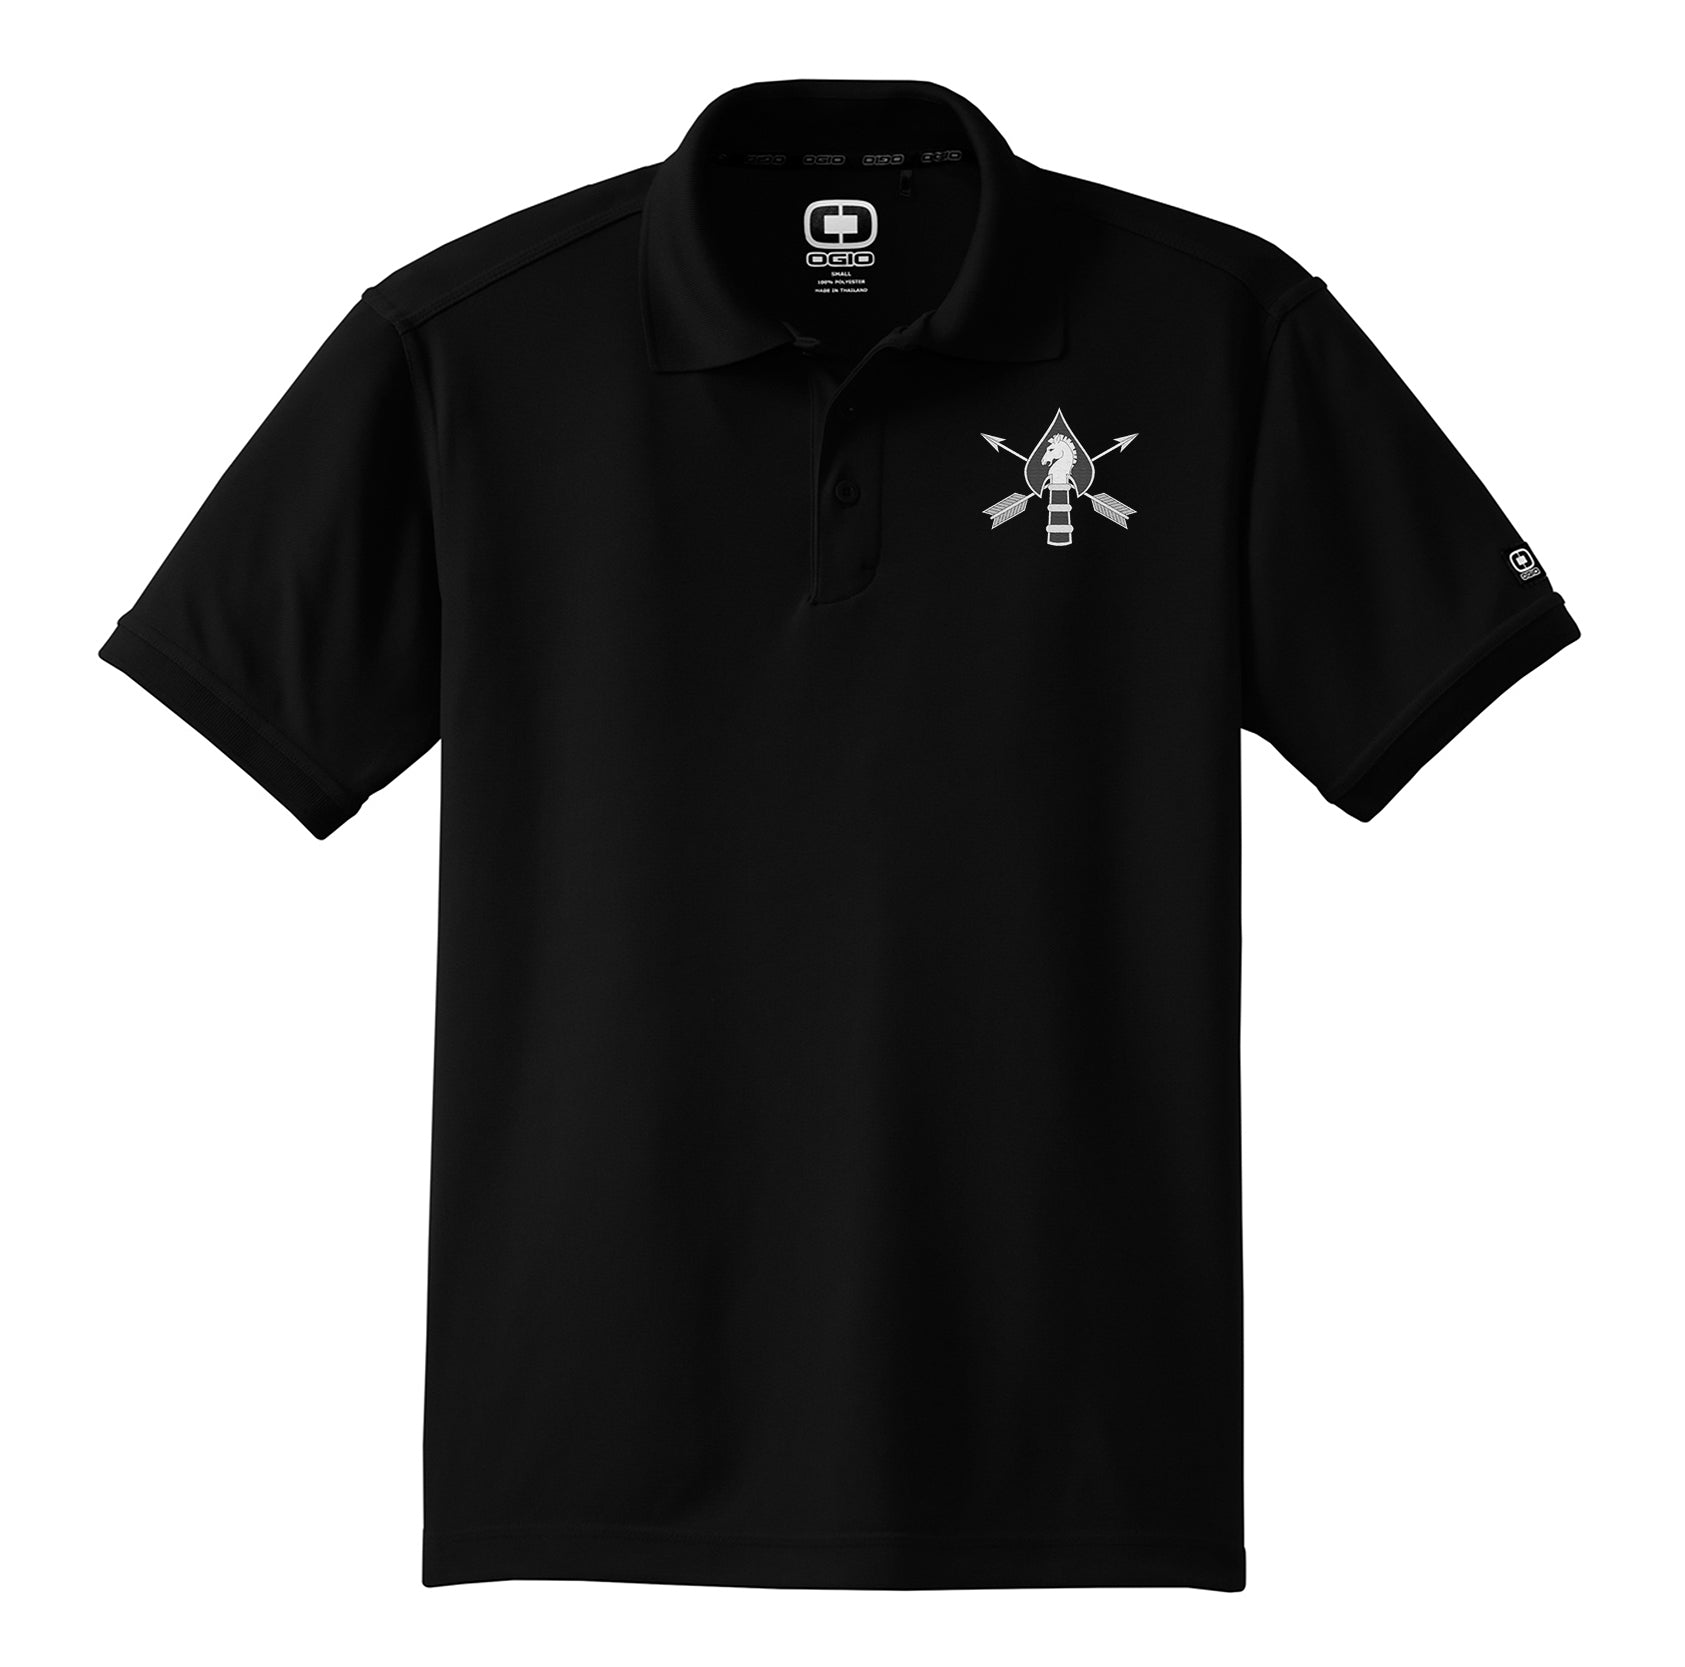 B-6-2 SWTG(A) Embroidered Polo